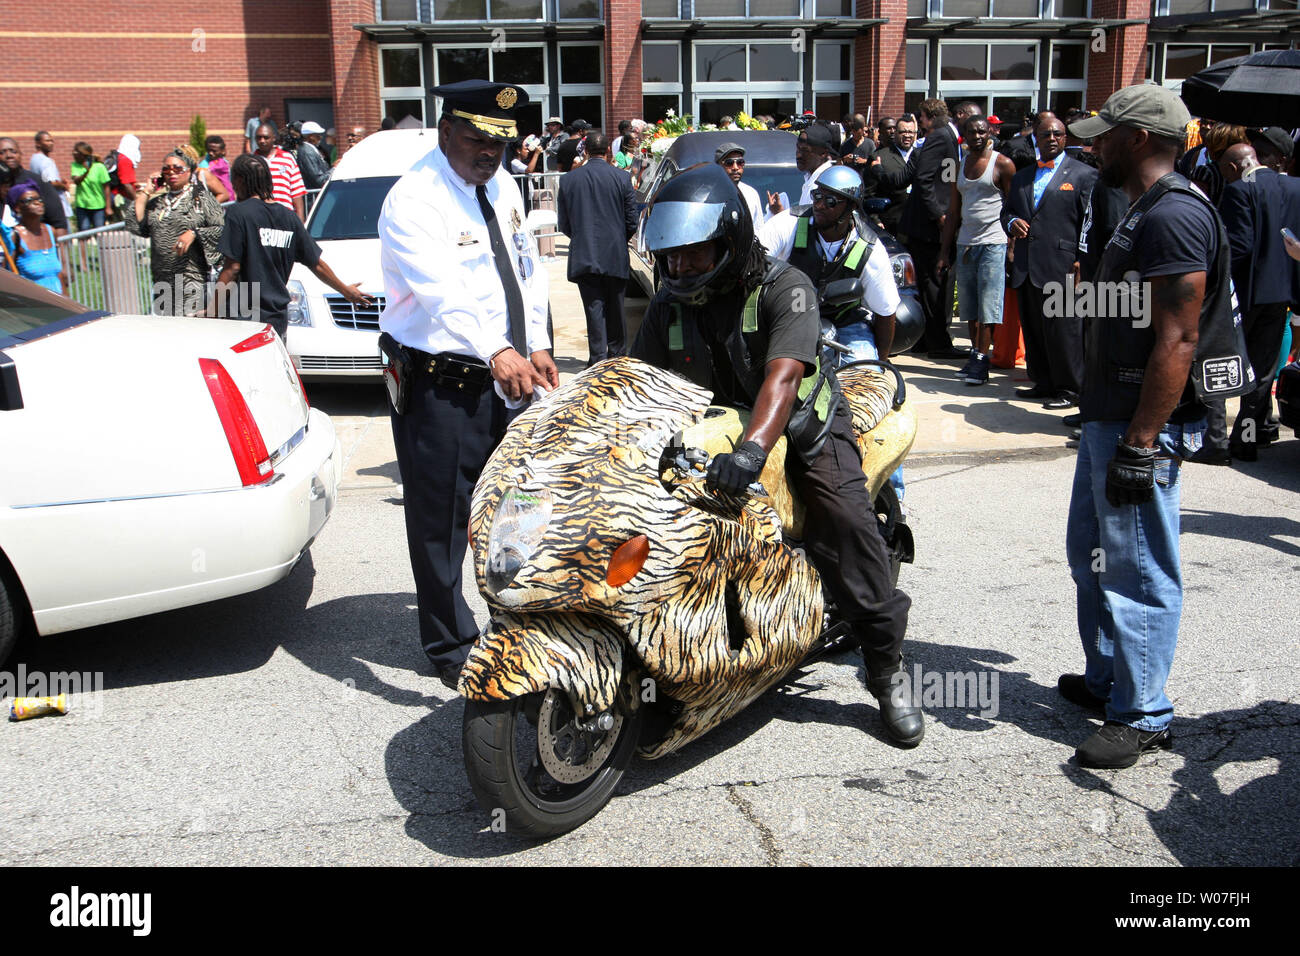 St. Louis Police Col. Reggie Harris looks at a motorcycle that is covered in a tiger skin as he leads the family procession from the Friendly Temple Missionary Baptist Church at the completion of the funeral for Michael Brown Jr. in St. Louis on August 25, 2014. Brown gained attention after was shot by a white Ferguson, Missouri police officer on August 9 and was unarmed. The shooting led to several nights of looting, arrests and heavy police presence.   UPI/Bill Greenblatt Stock Photo